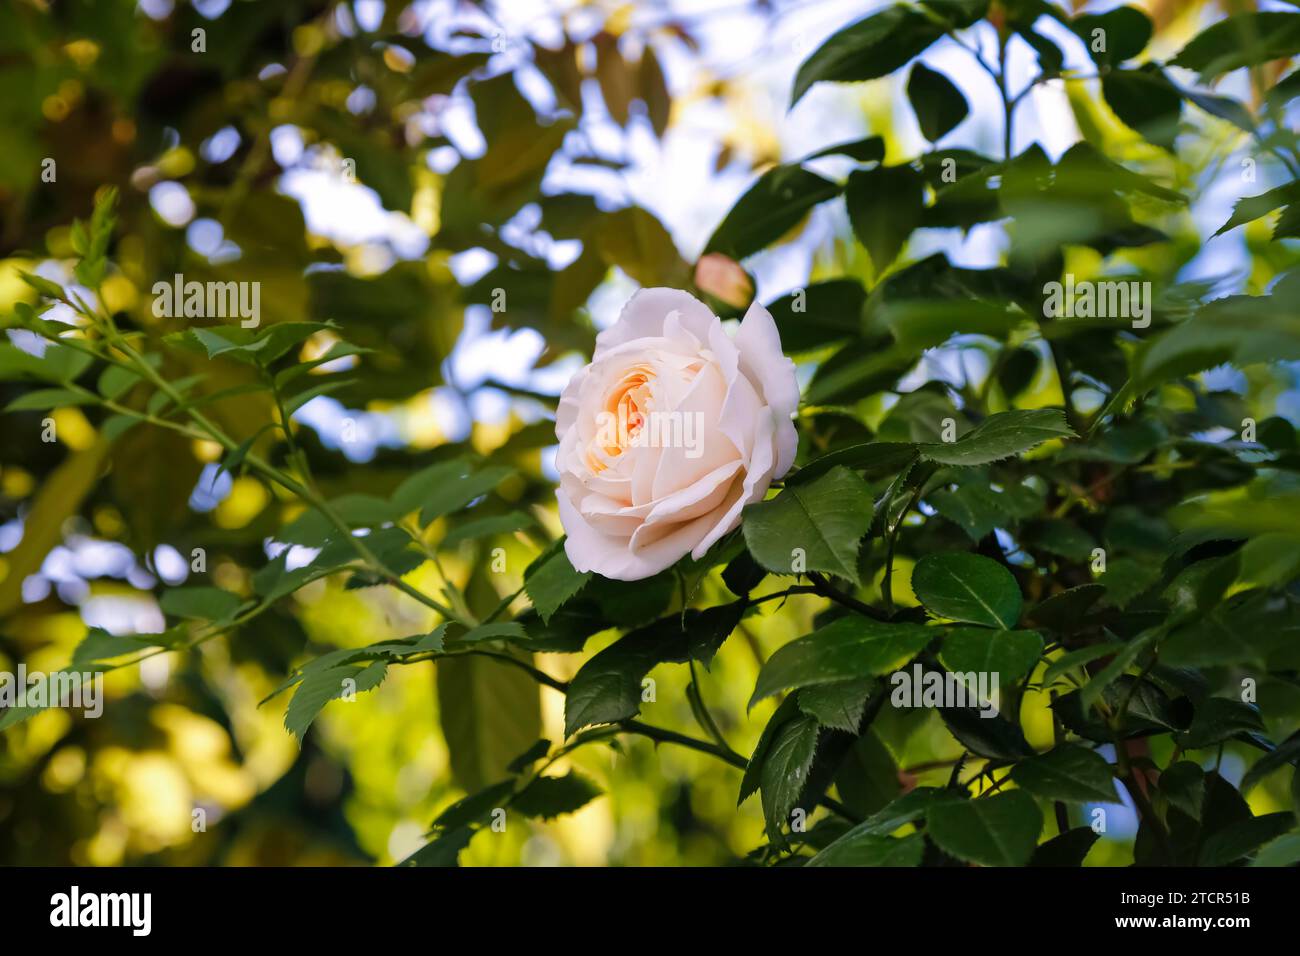 Rose (Rosa), blossom, dark green foliage, perennials, flowers, pale pink blossom, garden, bed, Germany Stock Photo